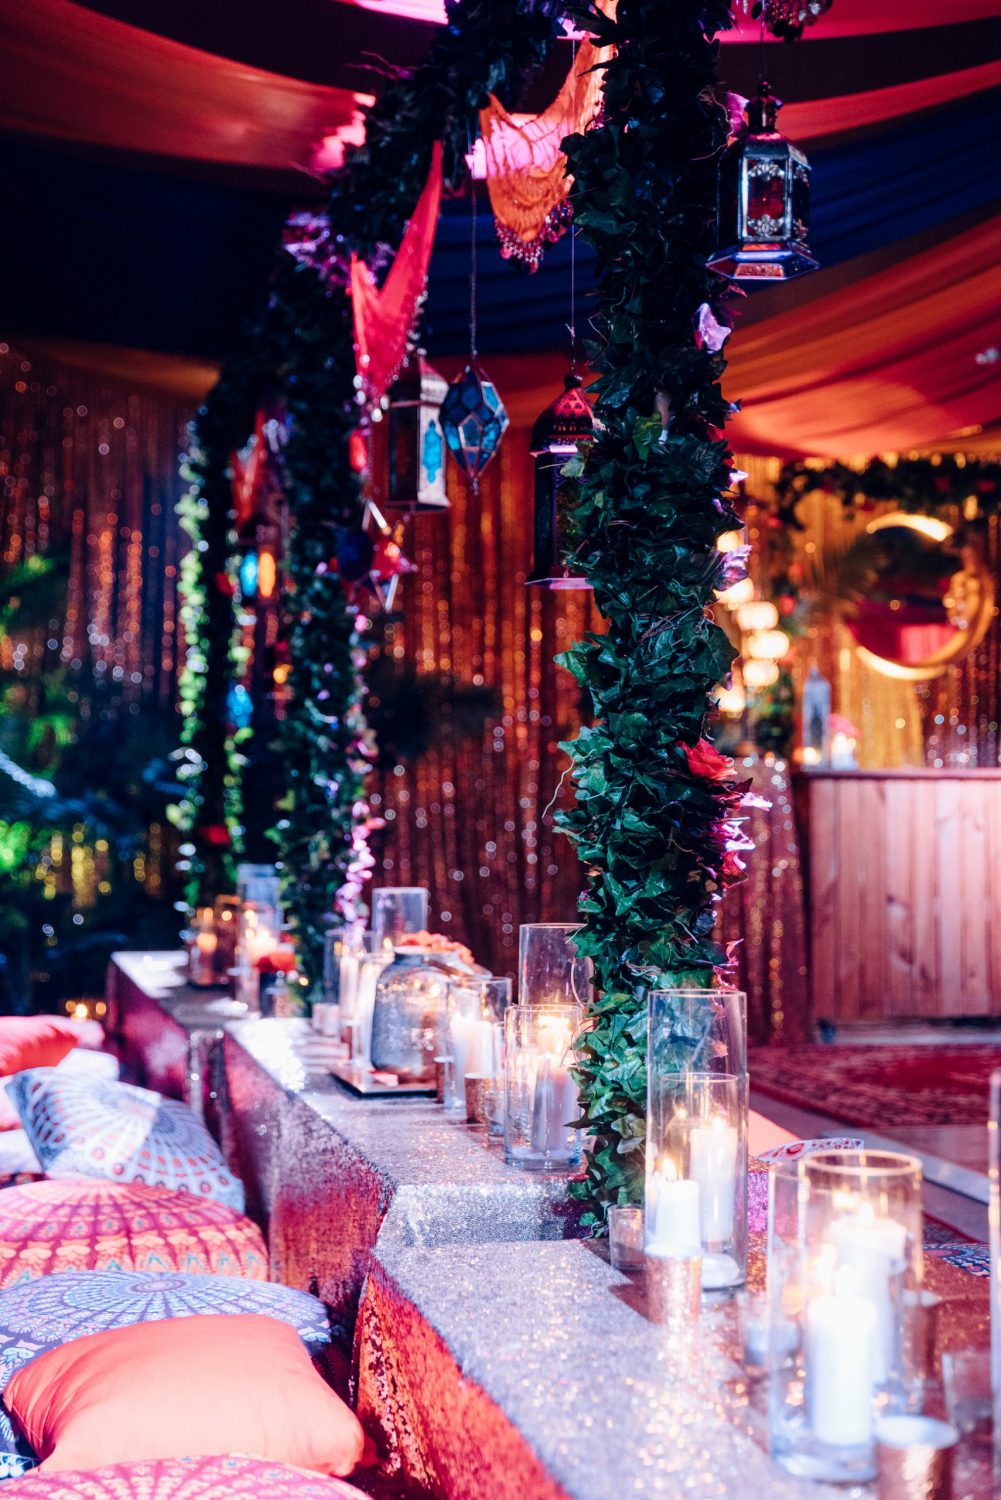 arabian nights themed table setup with decor and vases